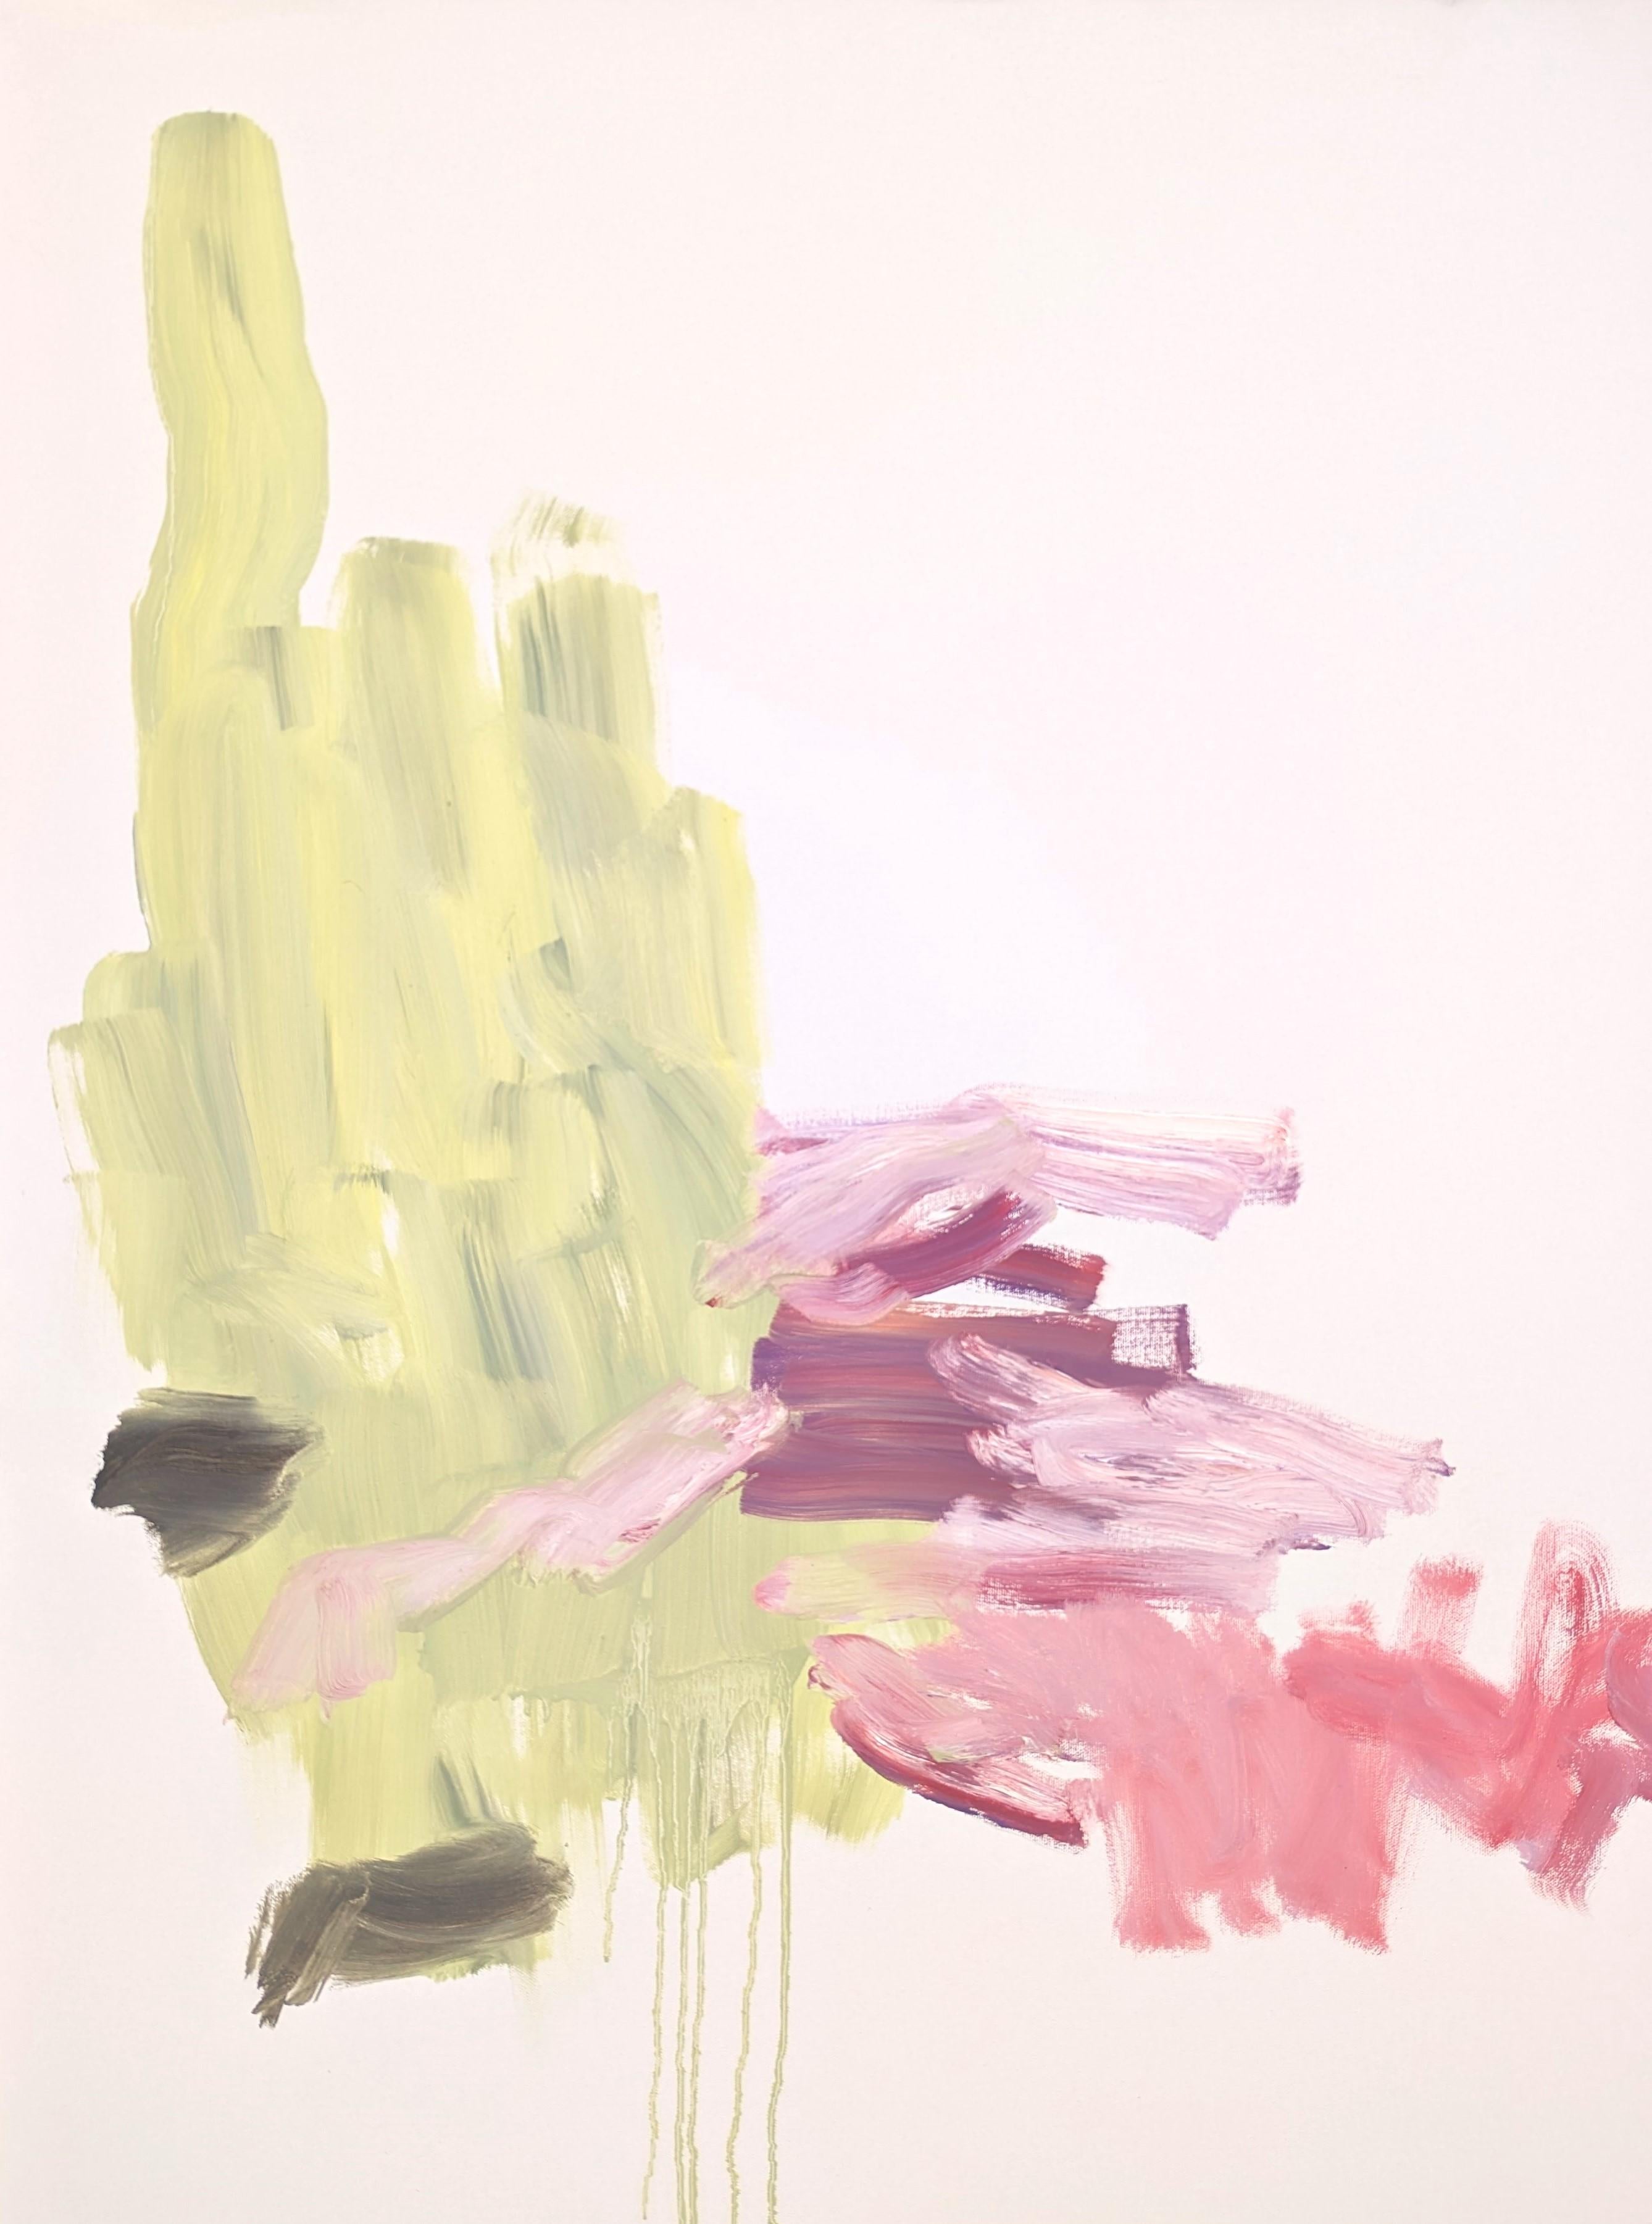 Abstract expressionist oil painting by contemporary Houston artist Benji Stiles. The work features gestural marks in pastel pink, yellow, and green set against an off-white background. Currently unframed, but options are available.

Artist